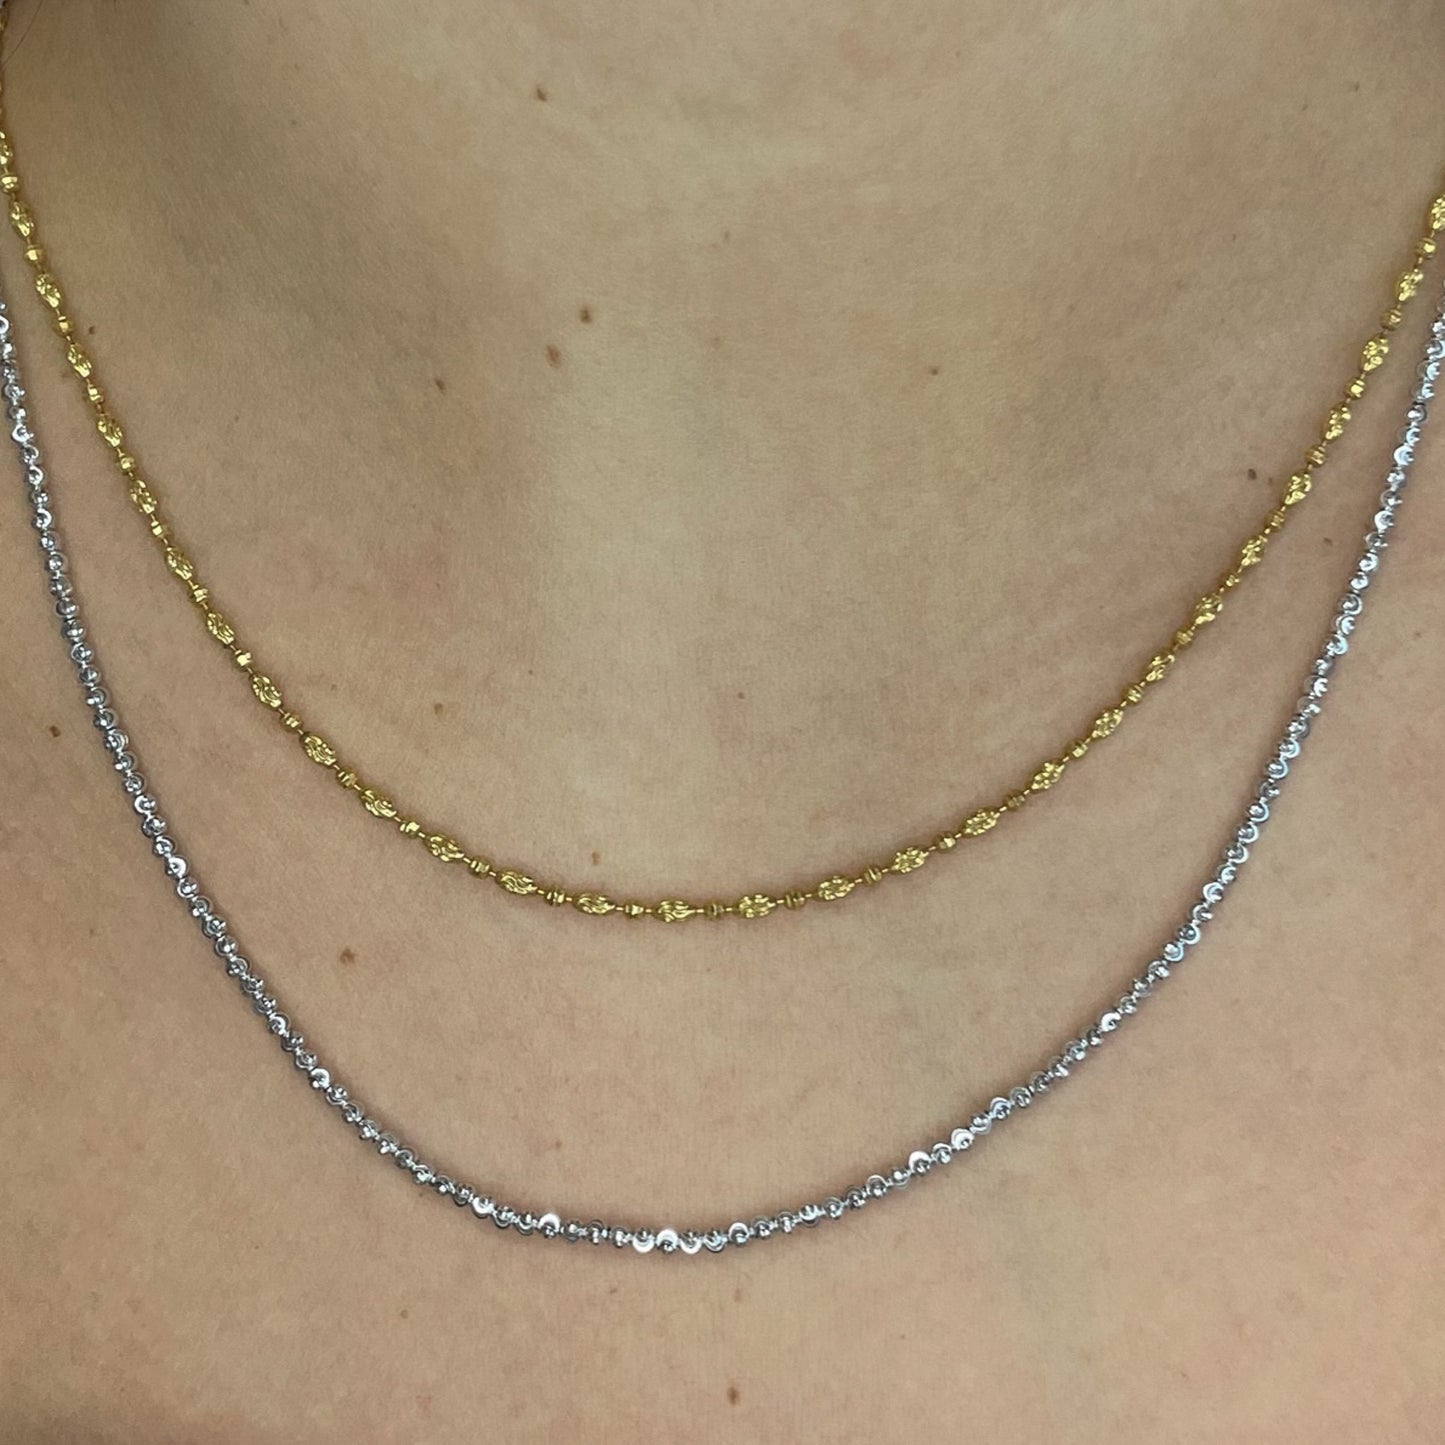 White Gold Beaded Necklace